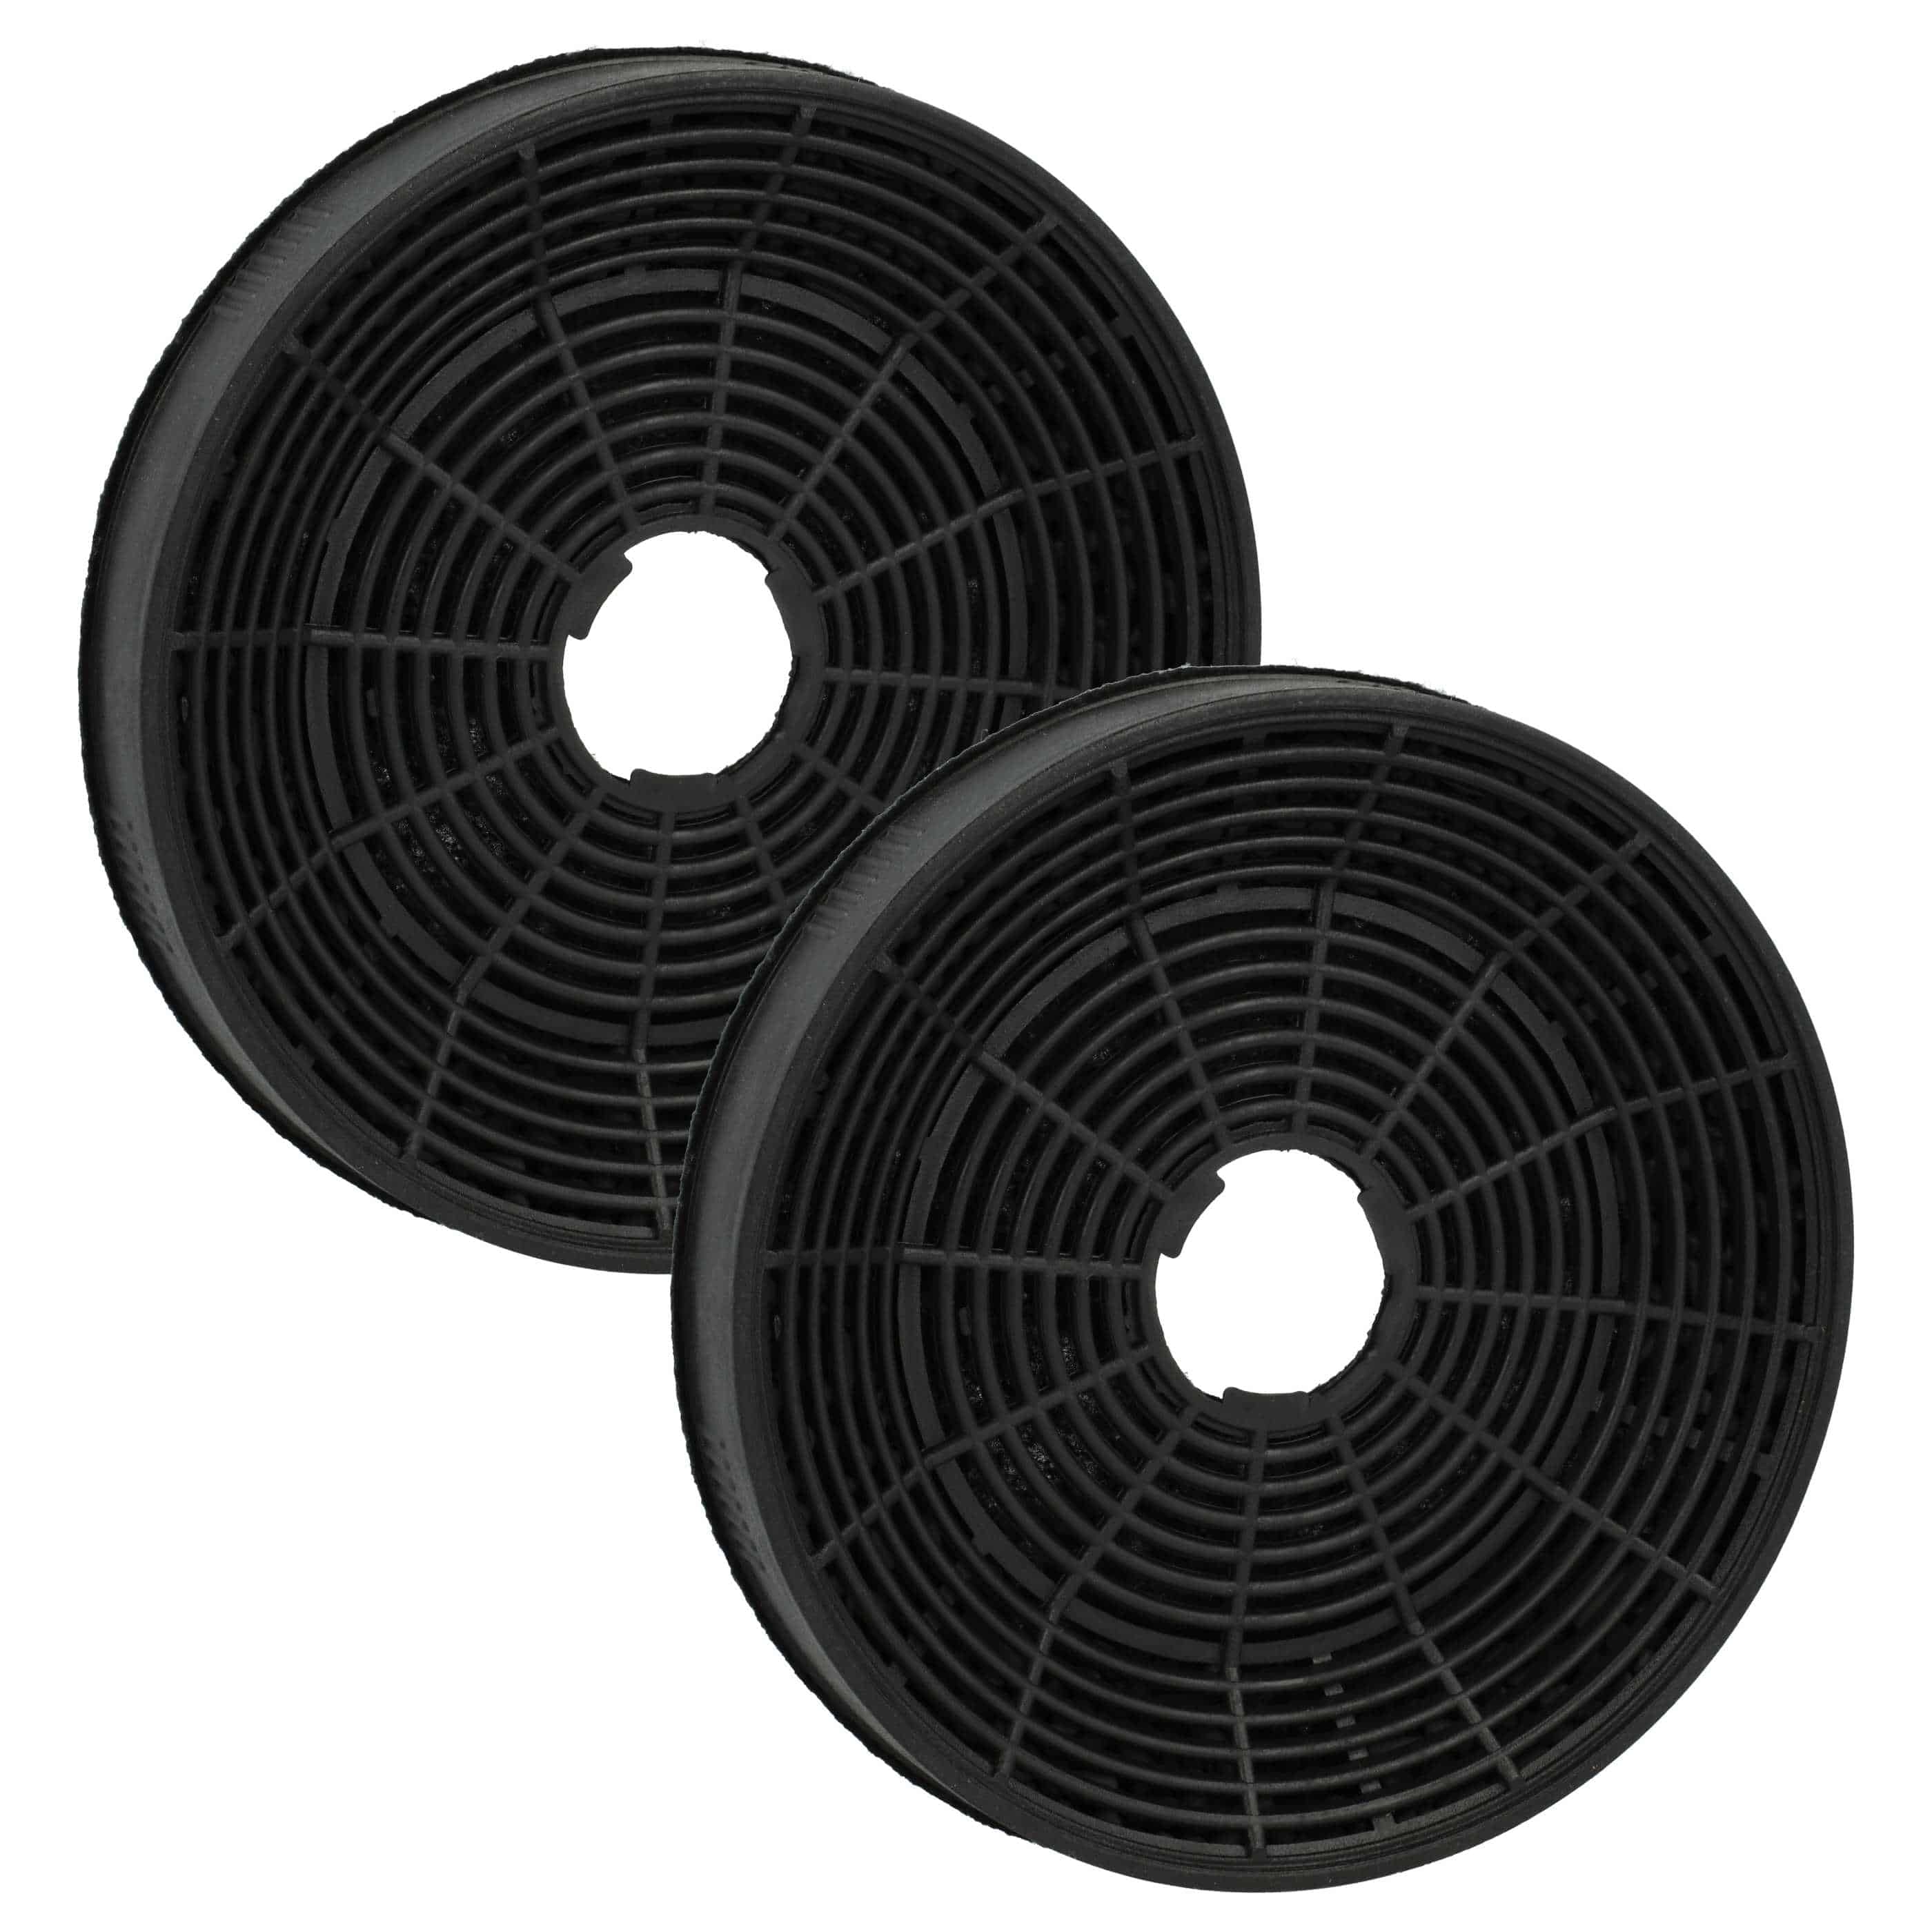 2x Activated Carbon Filter as Replacement for Amica KF 17146 for Bosch Hob etc. - 16 cm